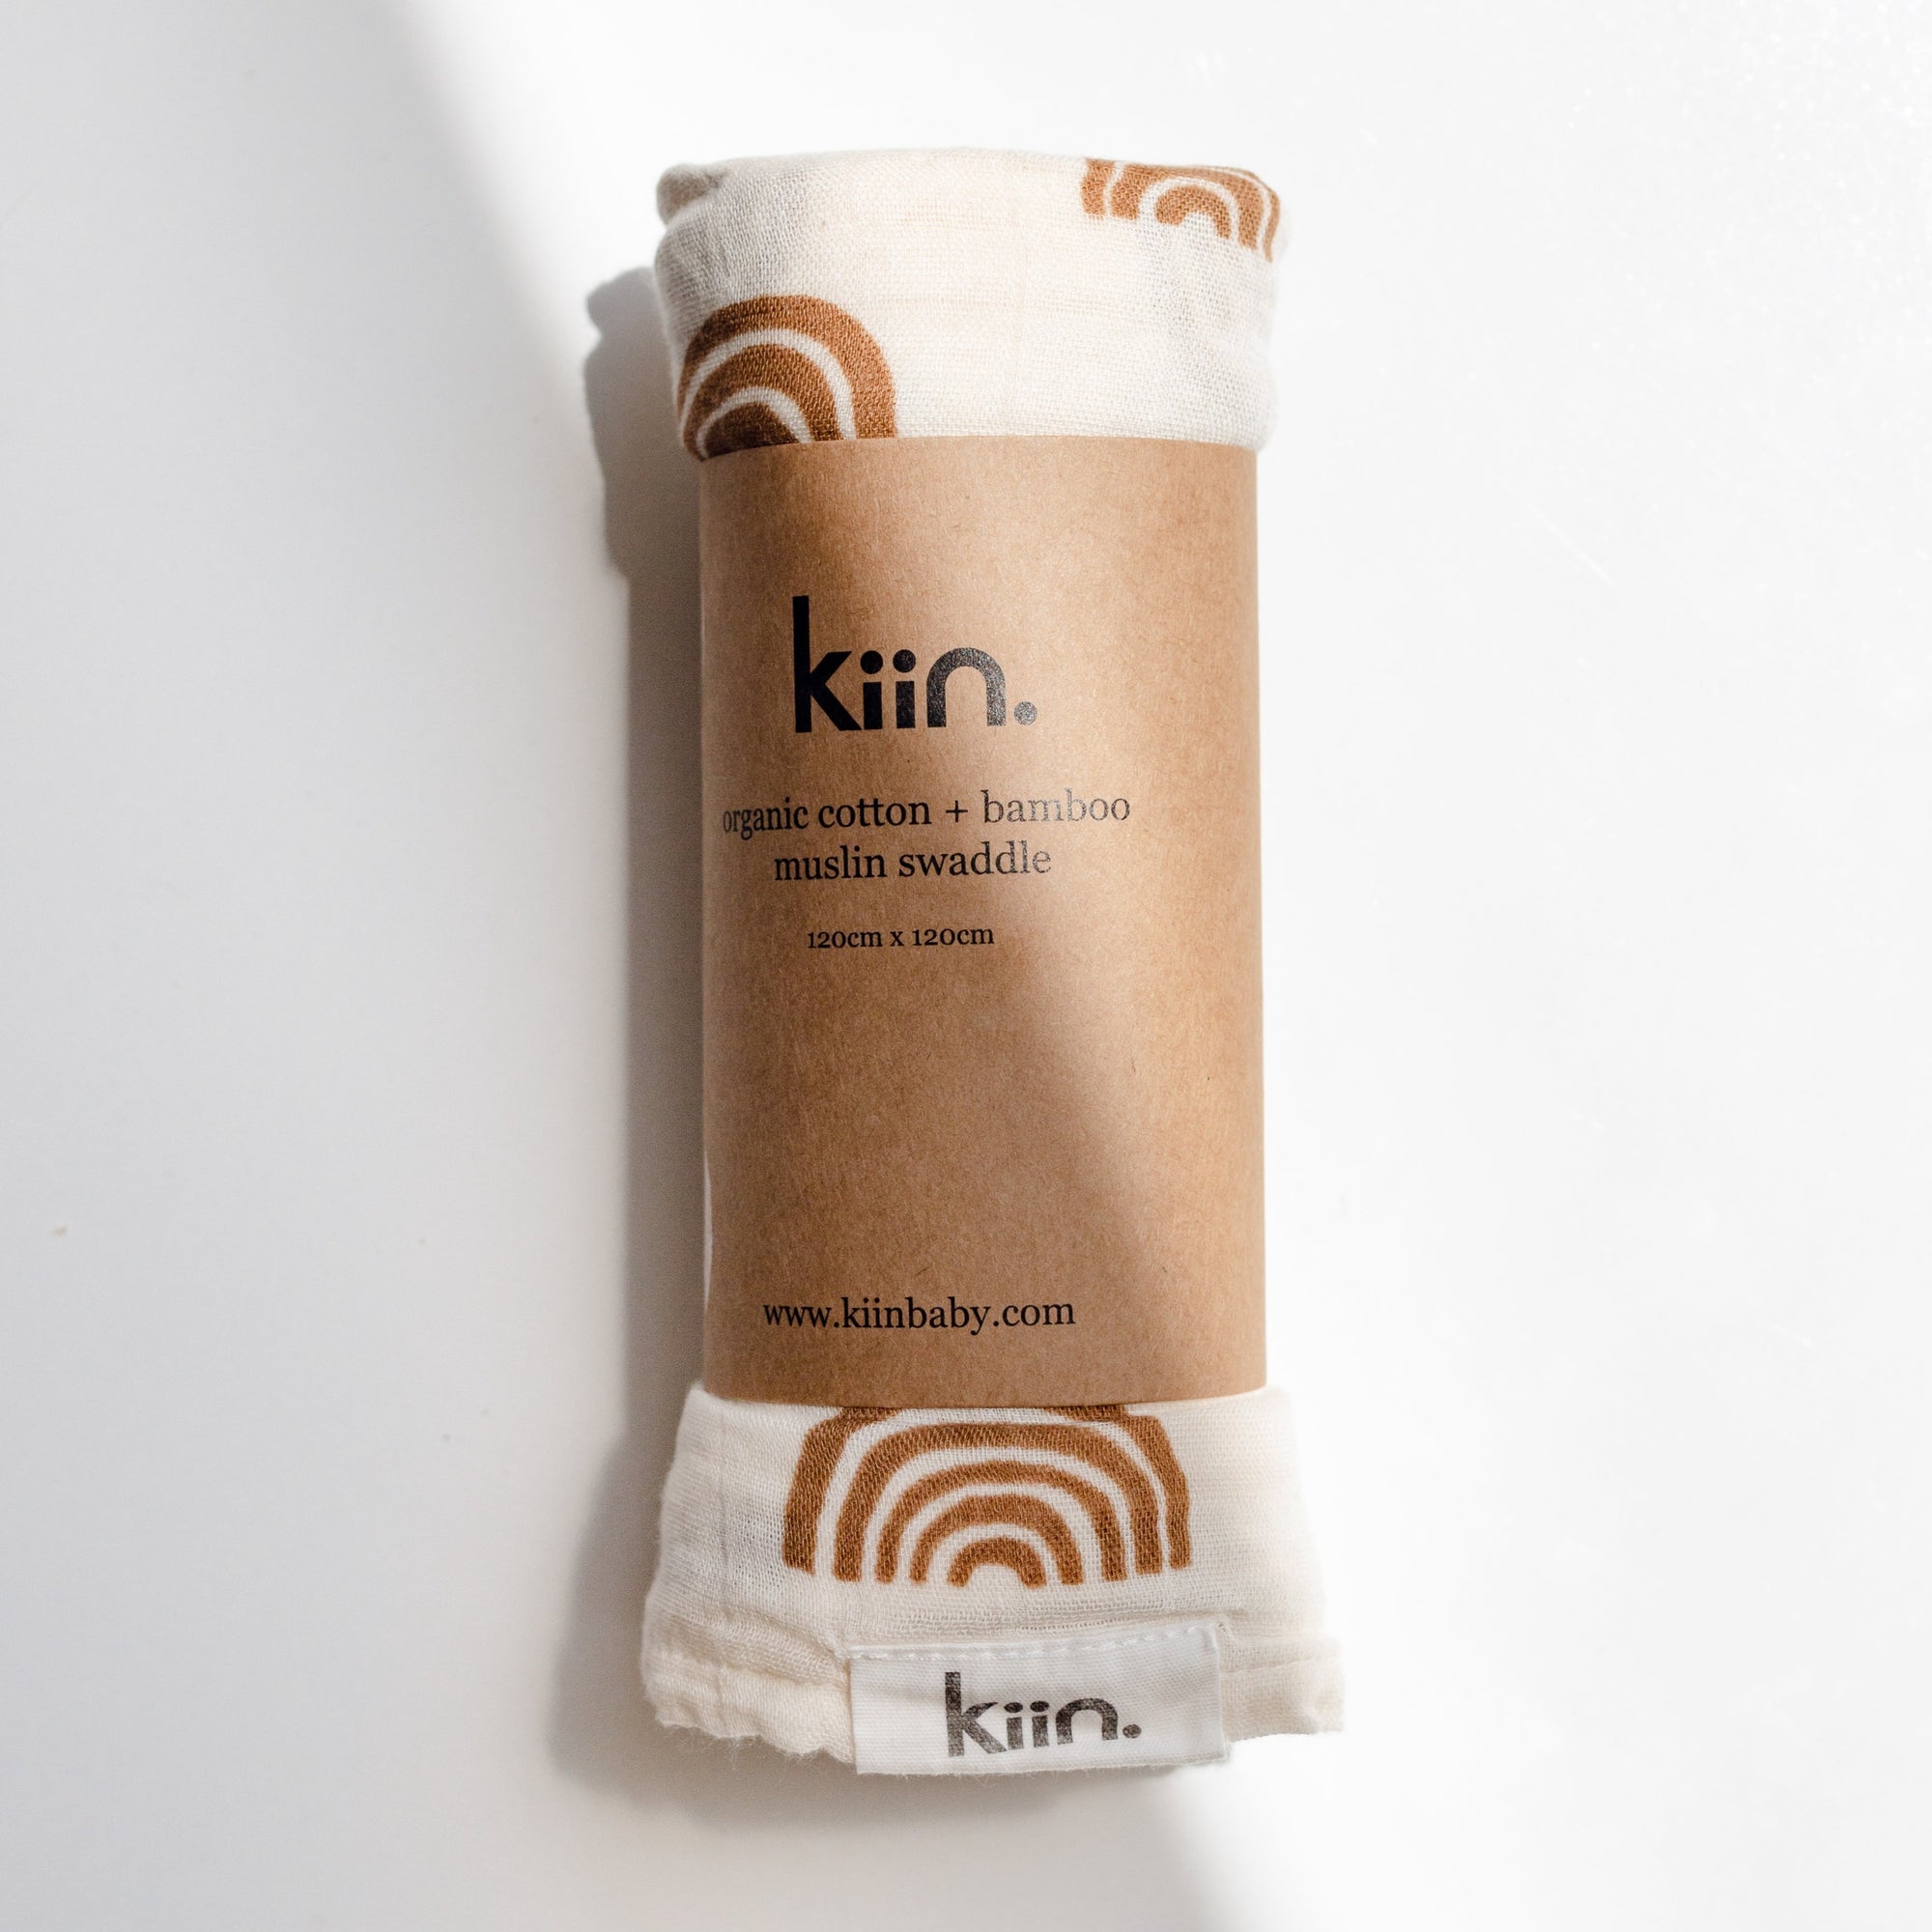 Kiin swaddles are made from the softest organic cotton + bamboo blend. The premium muslin fabric is lightweight & breathable, and incredibly soft and gentle on baby's skin; perfect for swaddling your little ones.